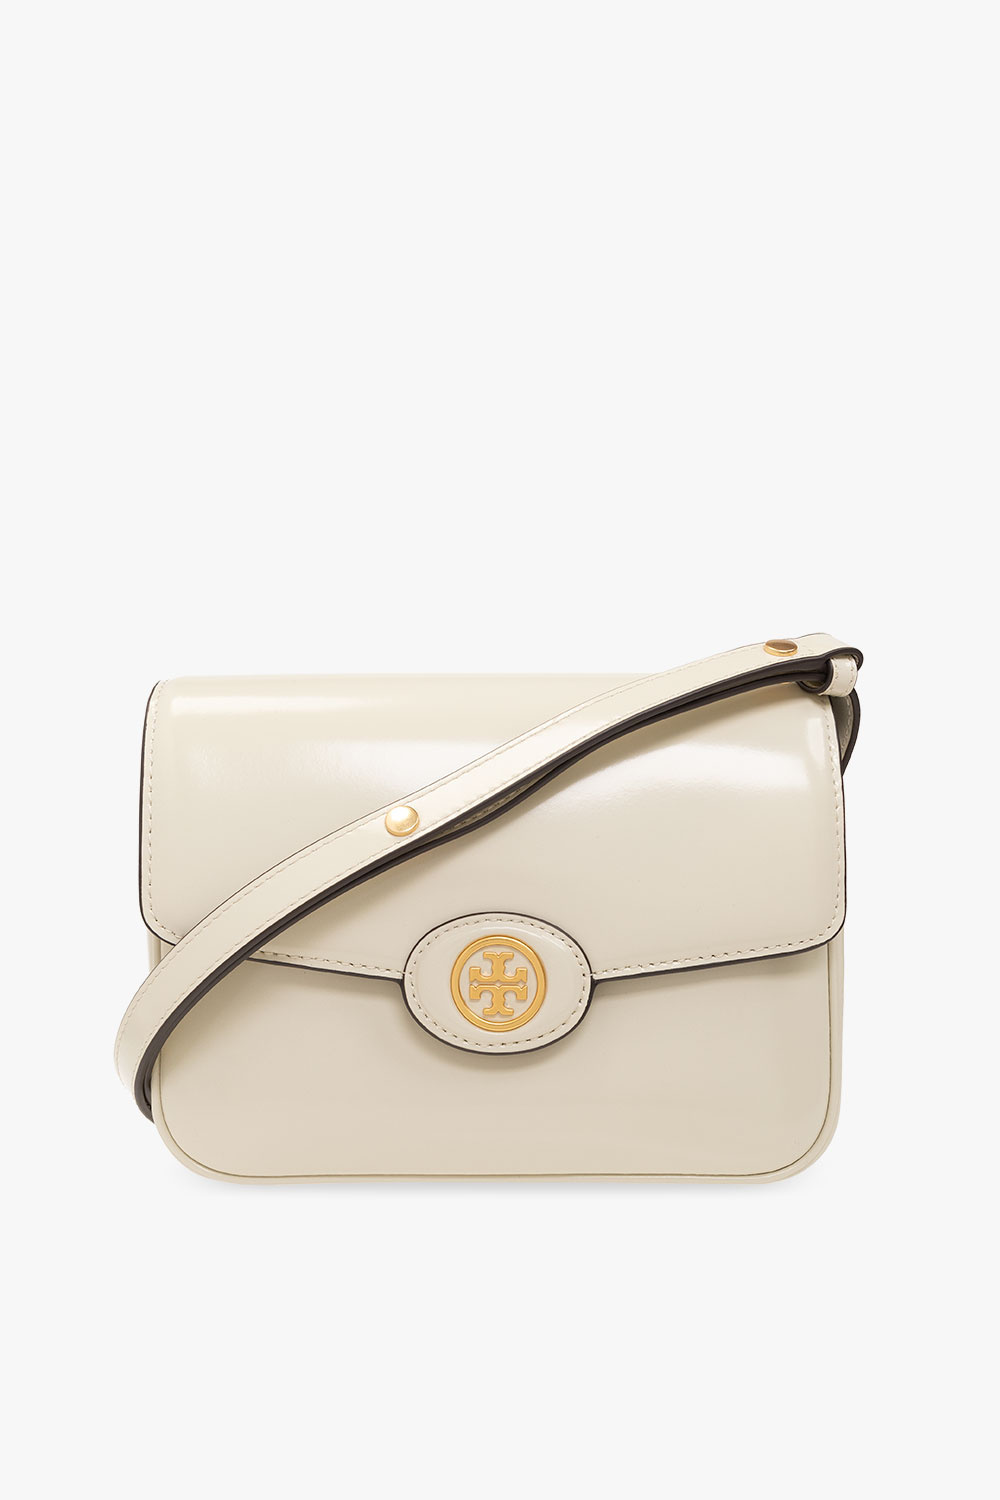 SOLD) Tory Burch Robinson Pebbled Mini - Oh bags and more